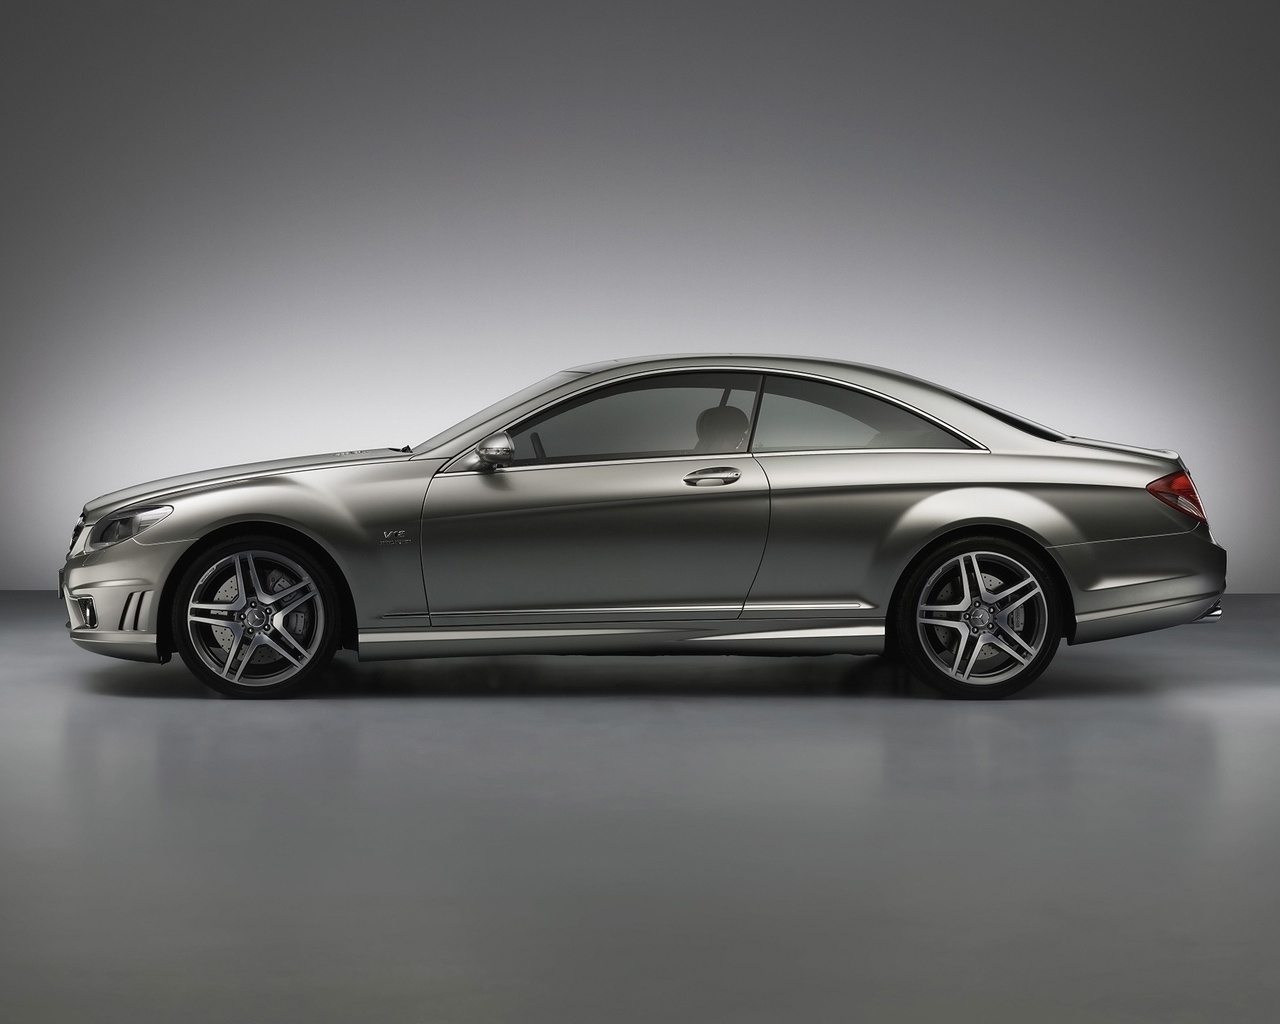 Mercedes Benz CL65 AMG 2008 for 1280 x 1024 resolution